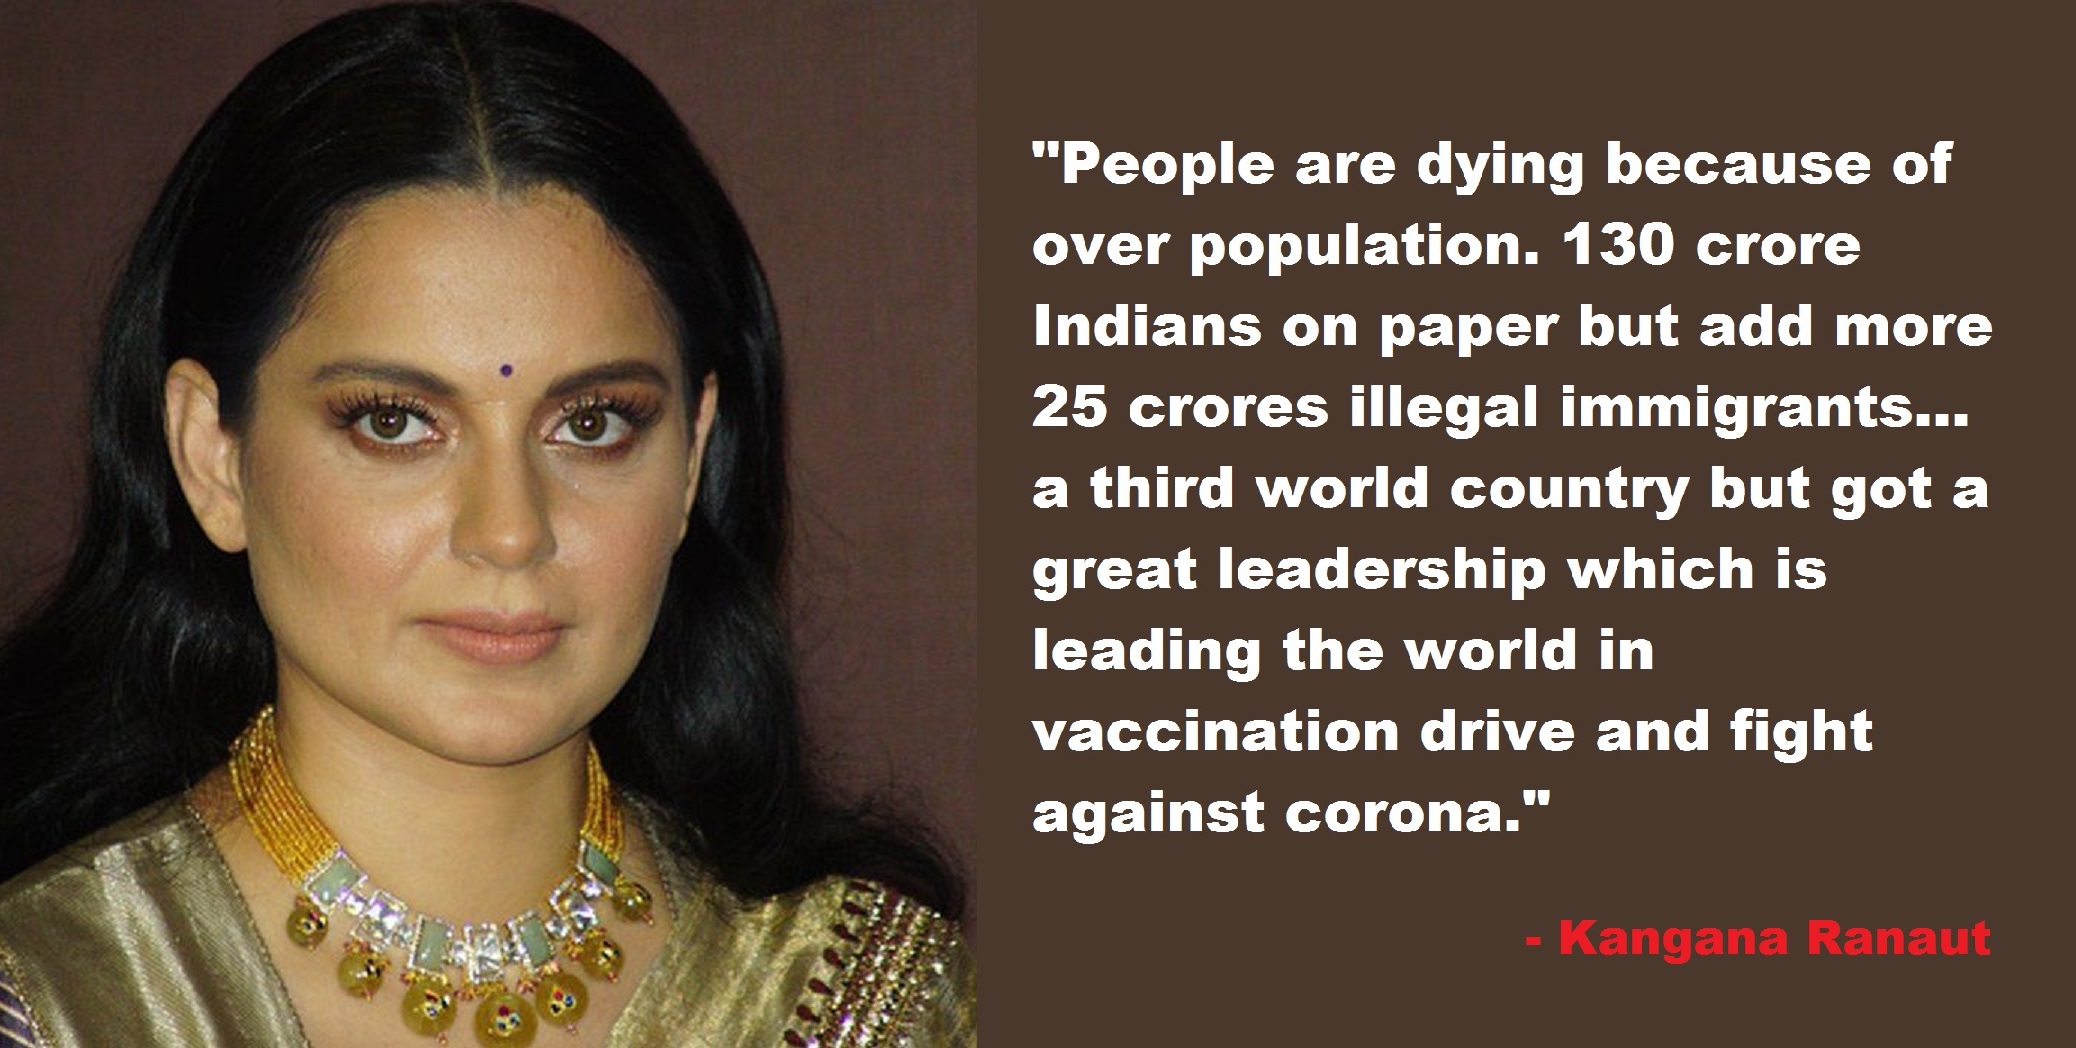 Twitter User Points Out Government Failures & Increasing Covid-19 Deaths, Kangana Blames It On Overpopulation